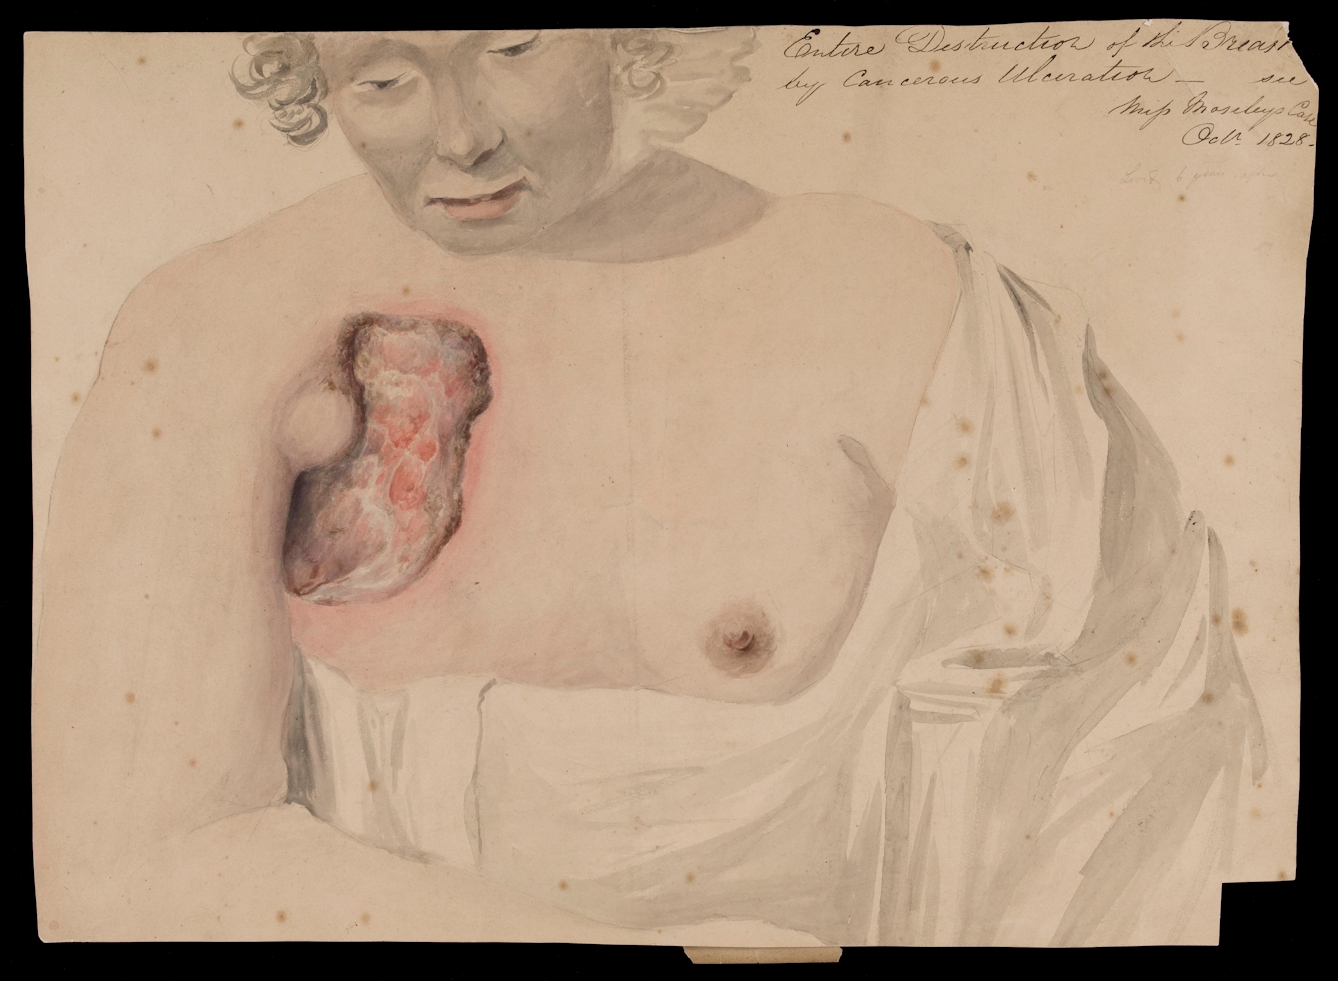 Watercolour of a woman looking downwards - her upper body is exposed showing her right breast destroyed by cancer